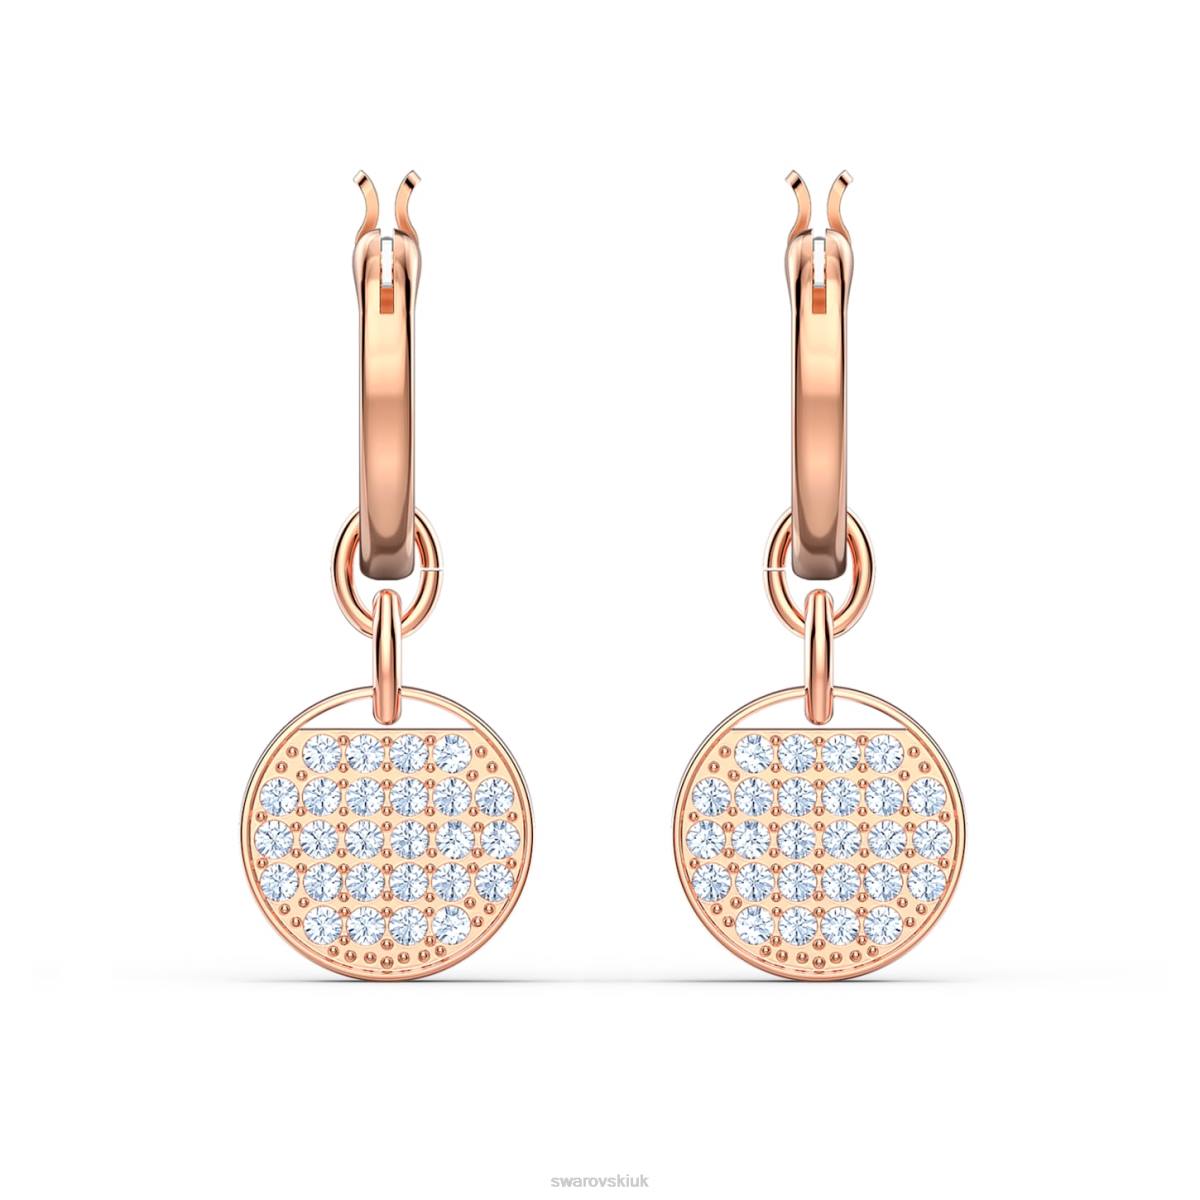 Jewelry Swarovski Ginger drop earrings White, Rose gold-tone plated 48JX822